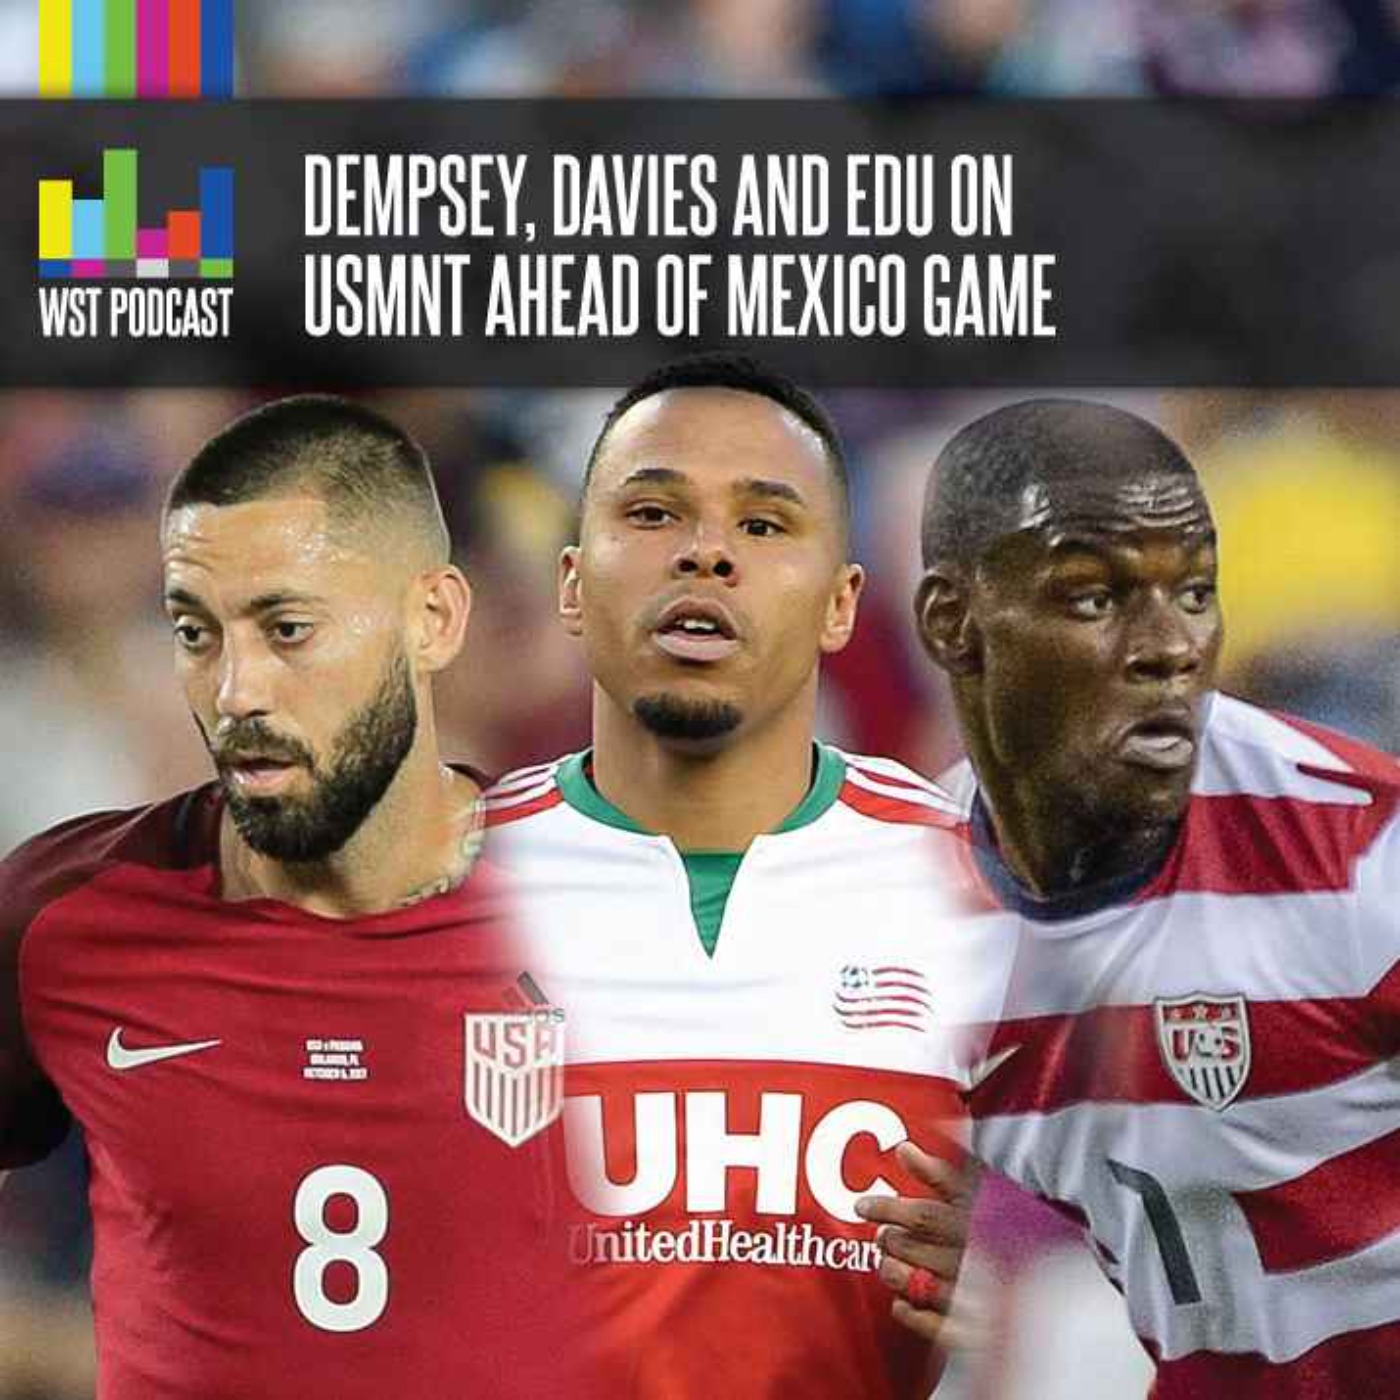 Dempsey, Davies and Edu on USMNT ahead of Mexico clash